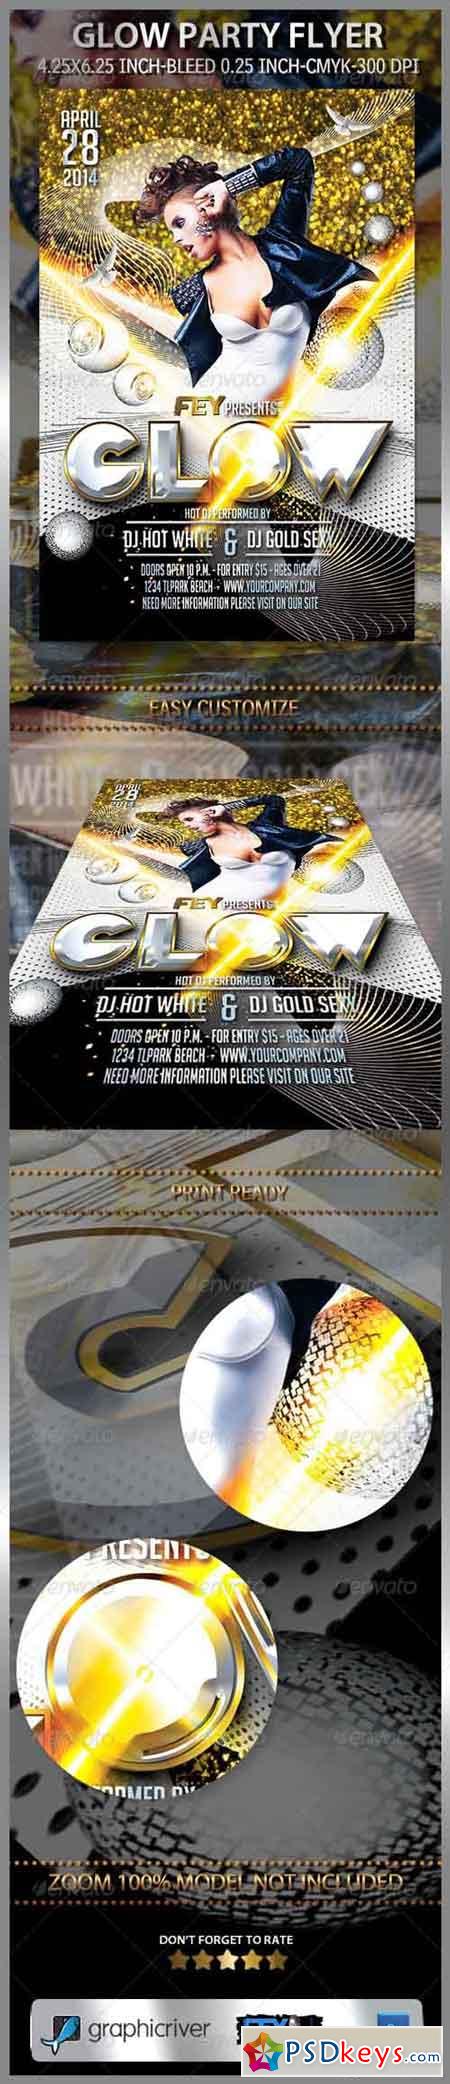 Glow Party Flyer 7575889